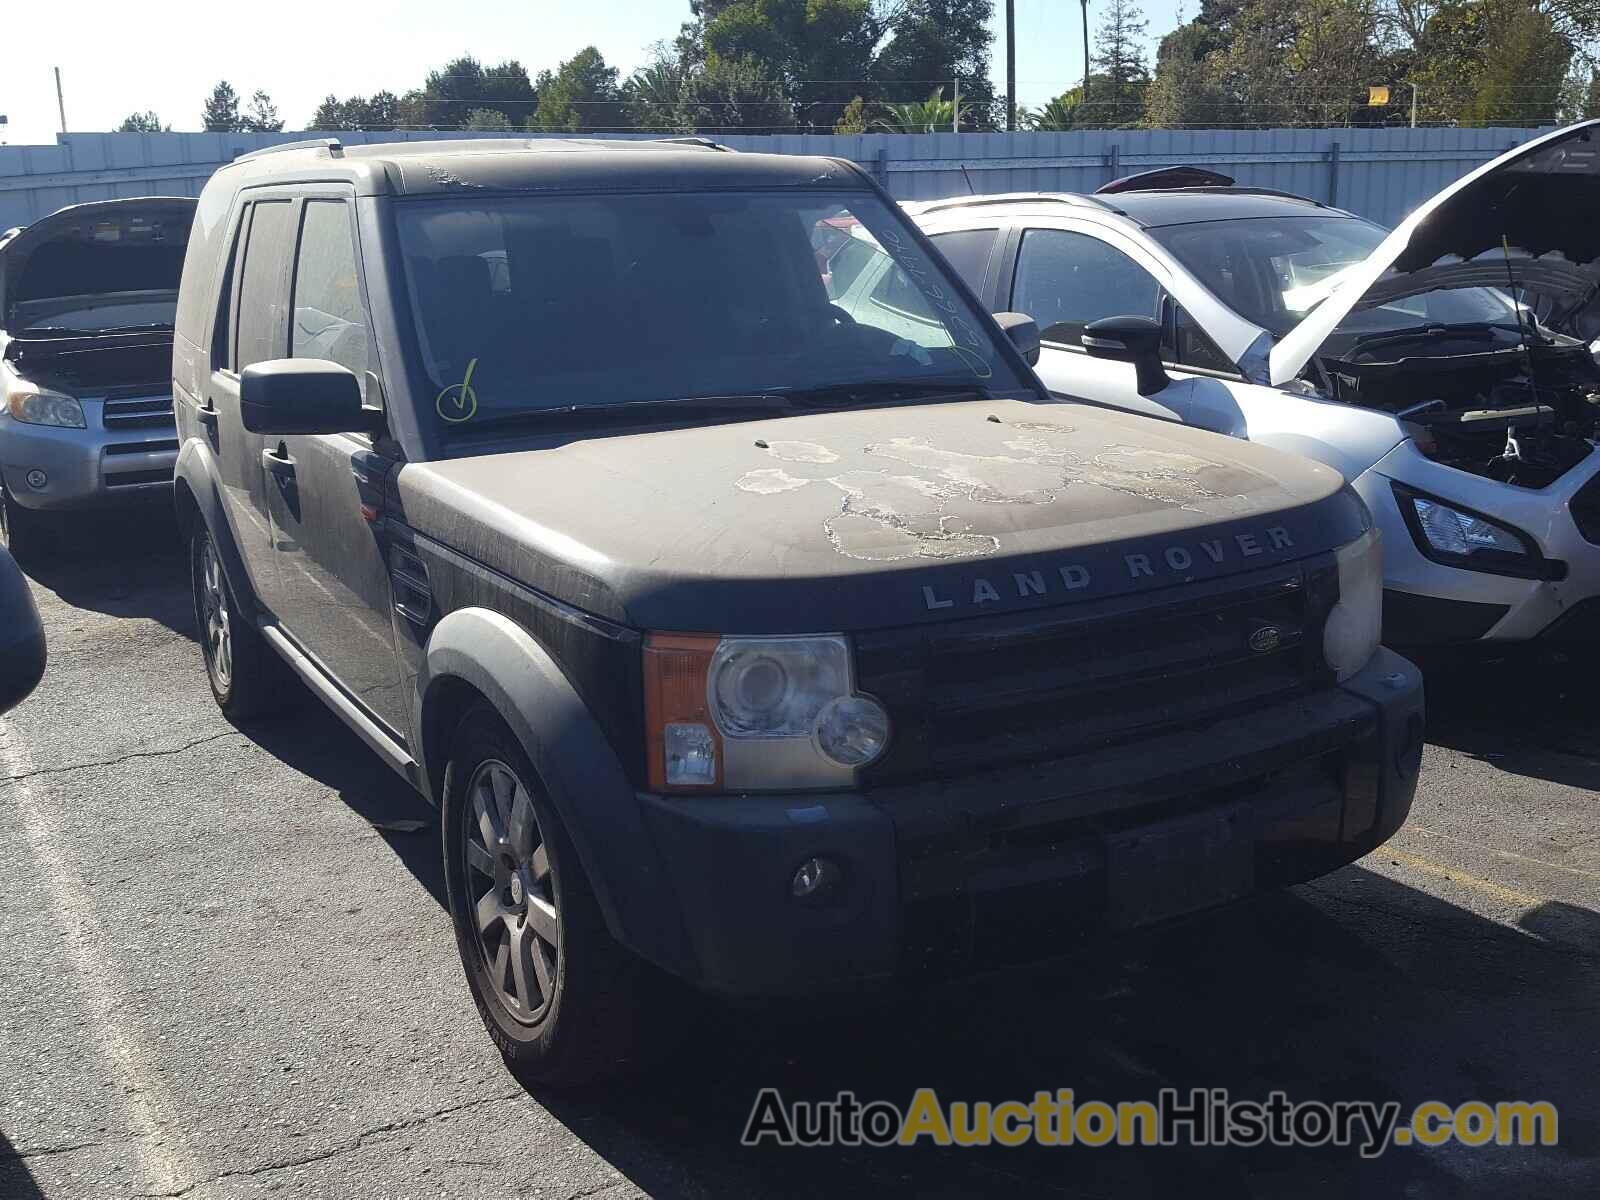 2005 LAND ROVER DISCOVERY, SALAA25445A301986